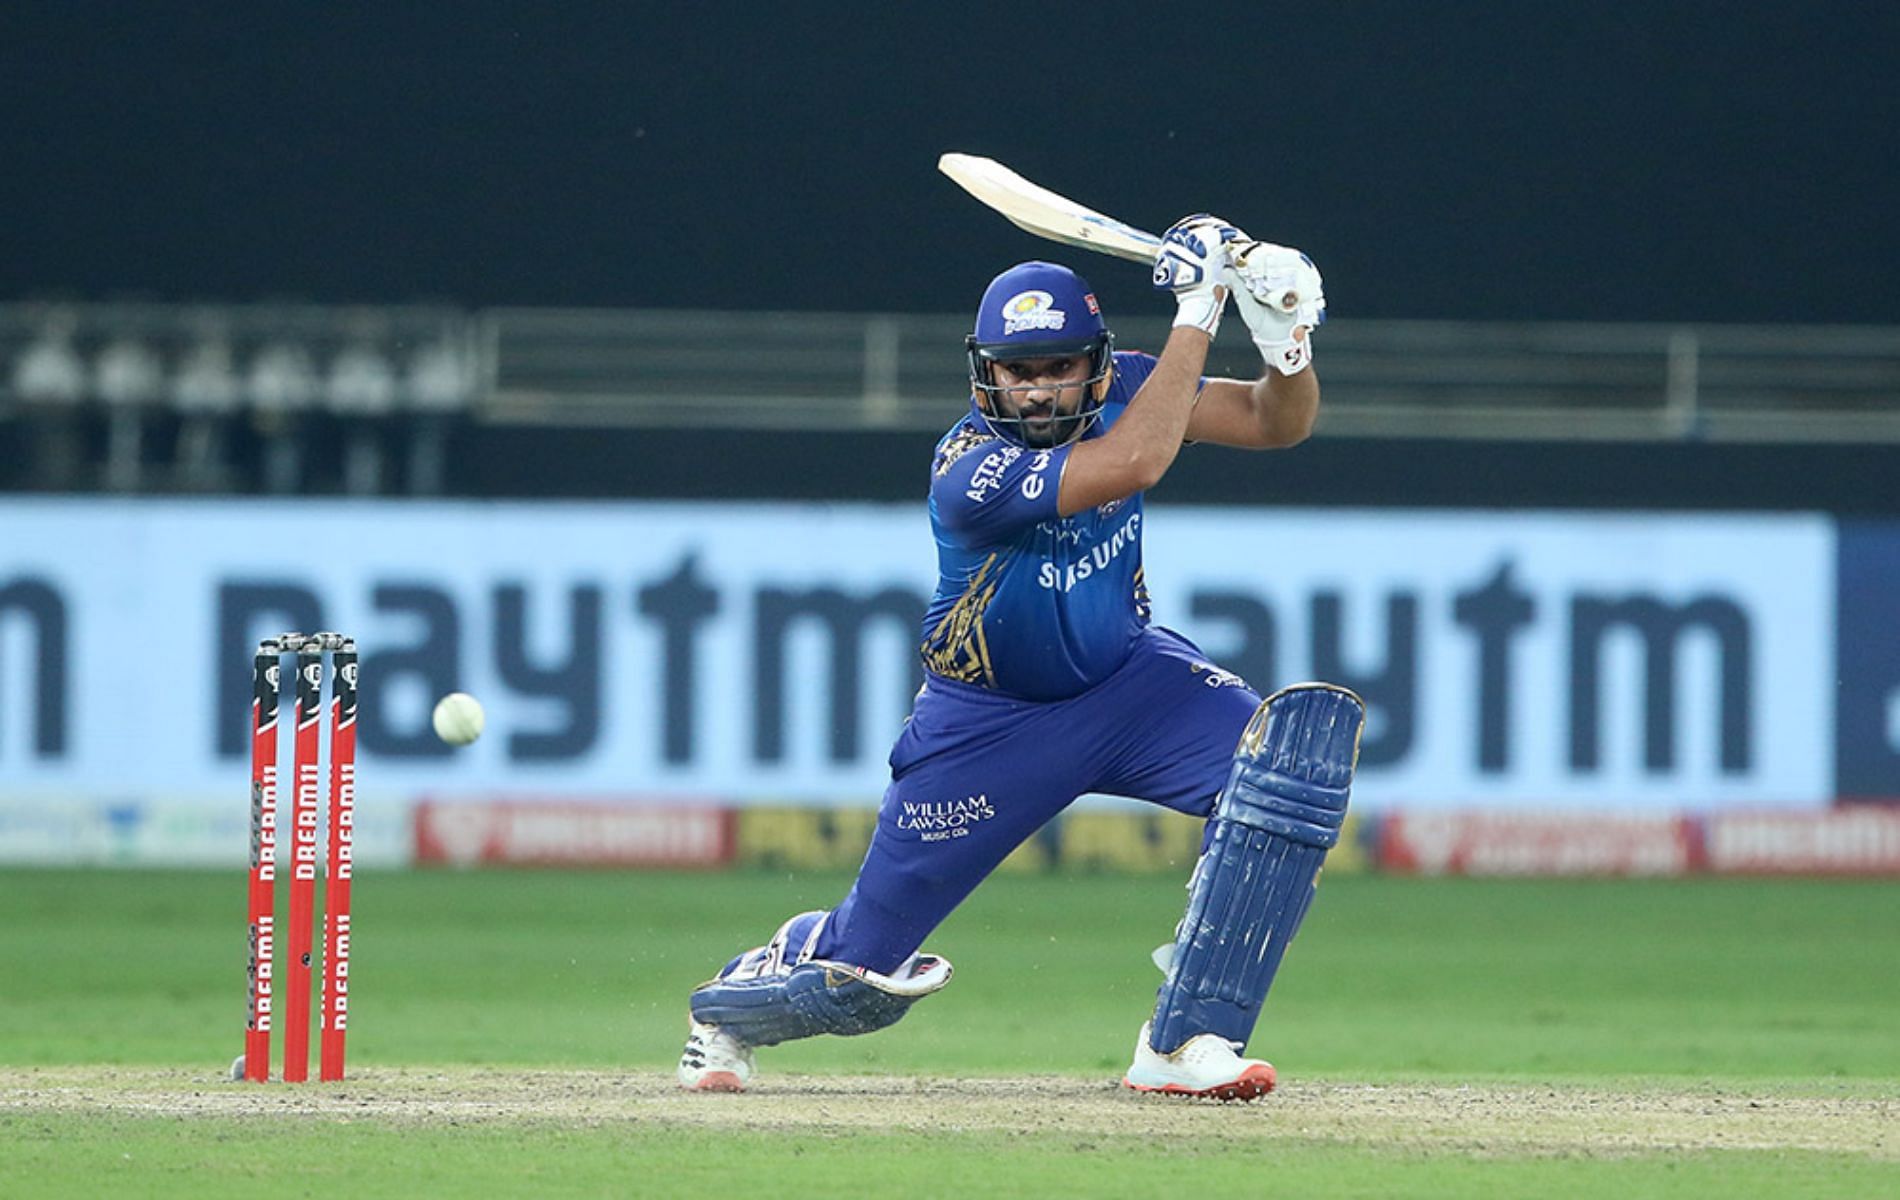 Rohit Sharma will hope to lead the Mumbai Indians to a record-extending sixth IPL title